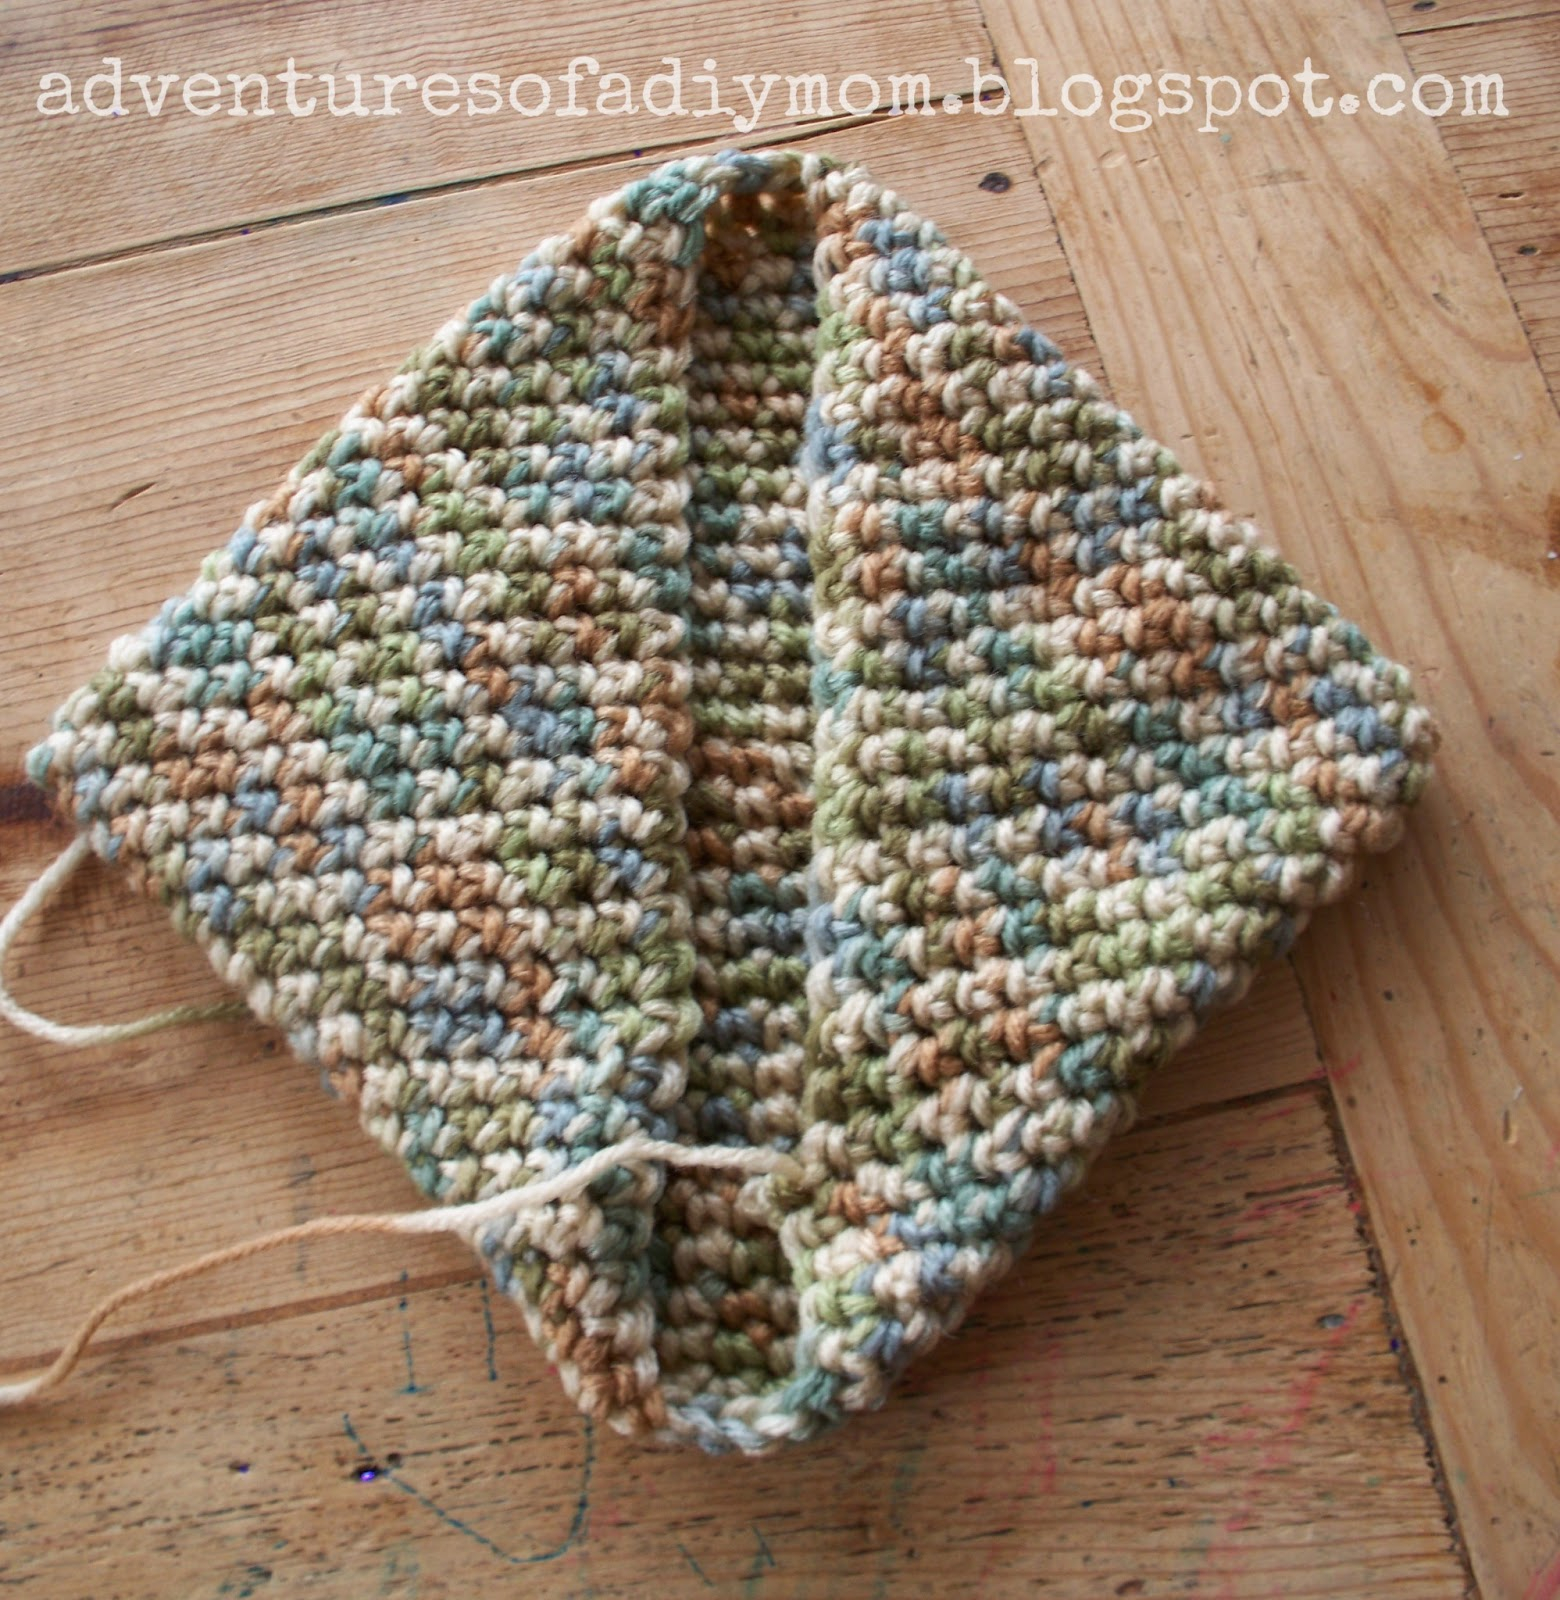 Knit Potholder Patterns How To Crochet A Hotpad Super Easy Version Adventures Of A Diy Mom